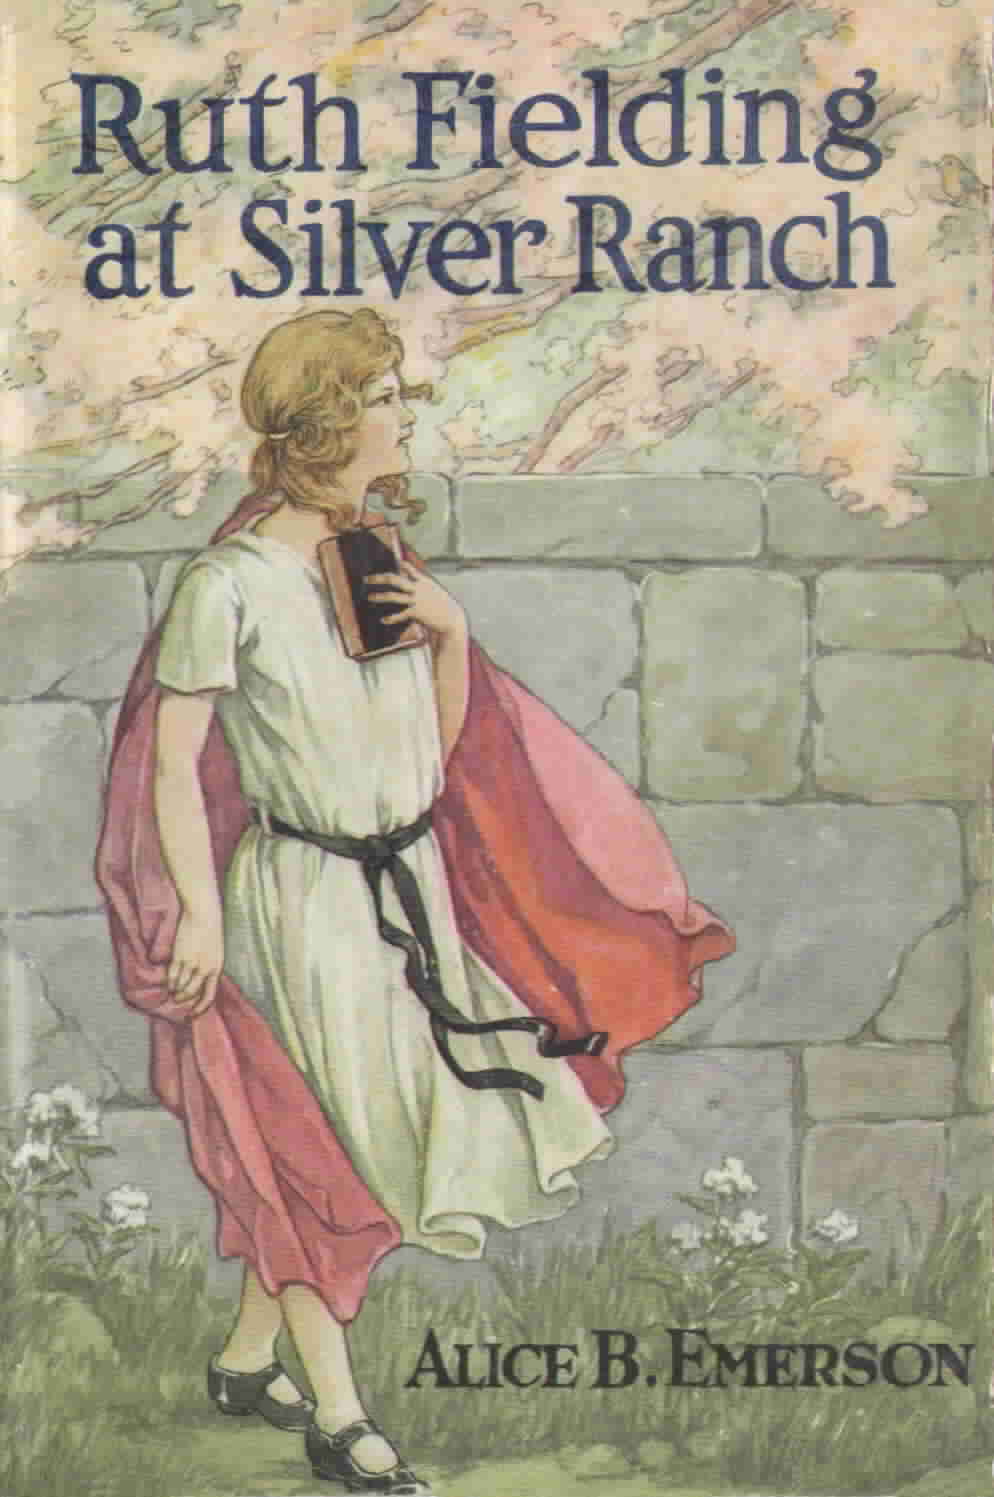 5. Ruth Fielding at Silver Ranch